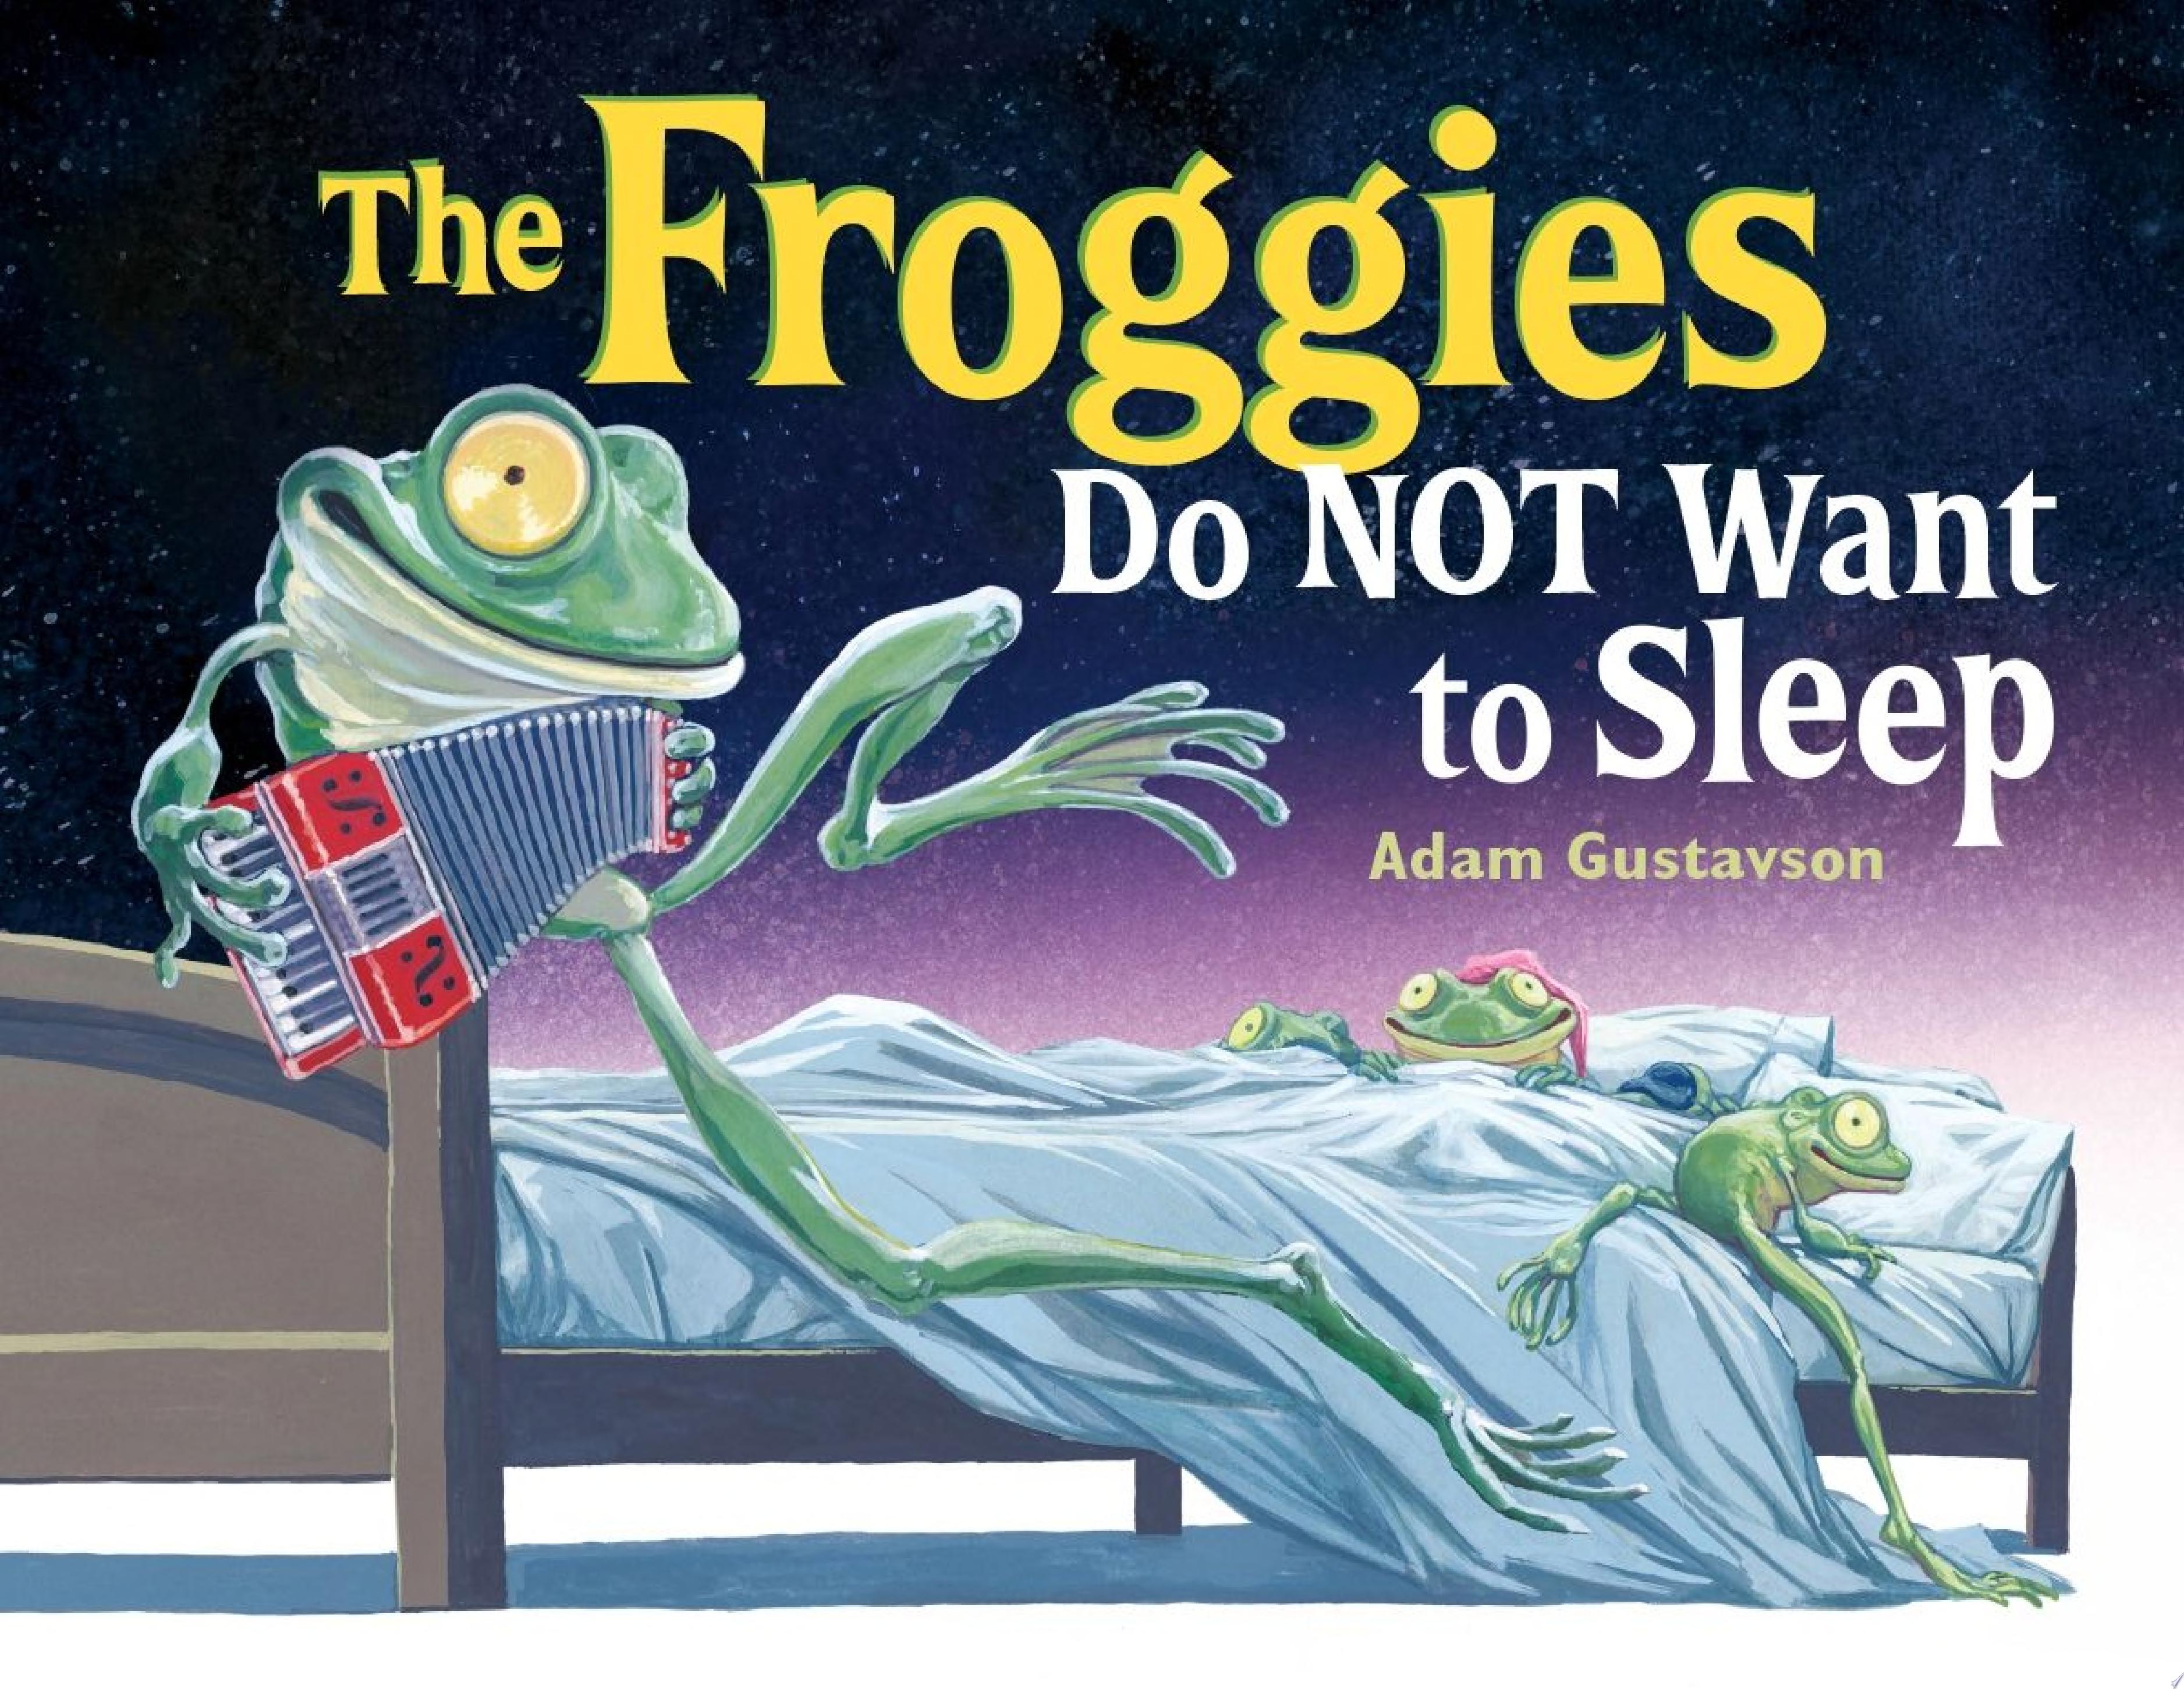 Image for "The Froggies Do NOT Want to Sleep"